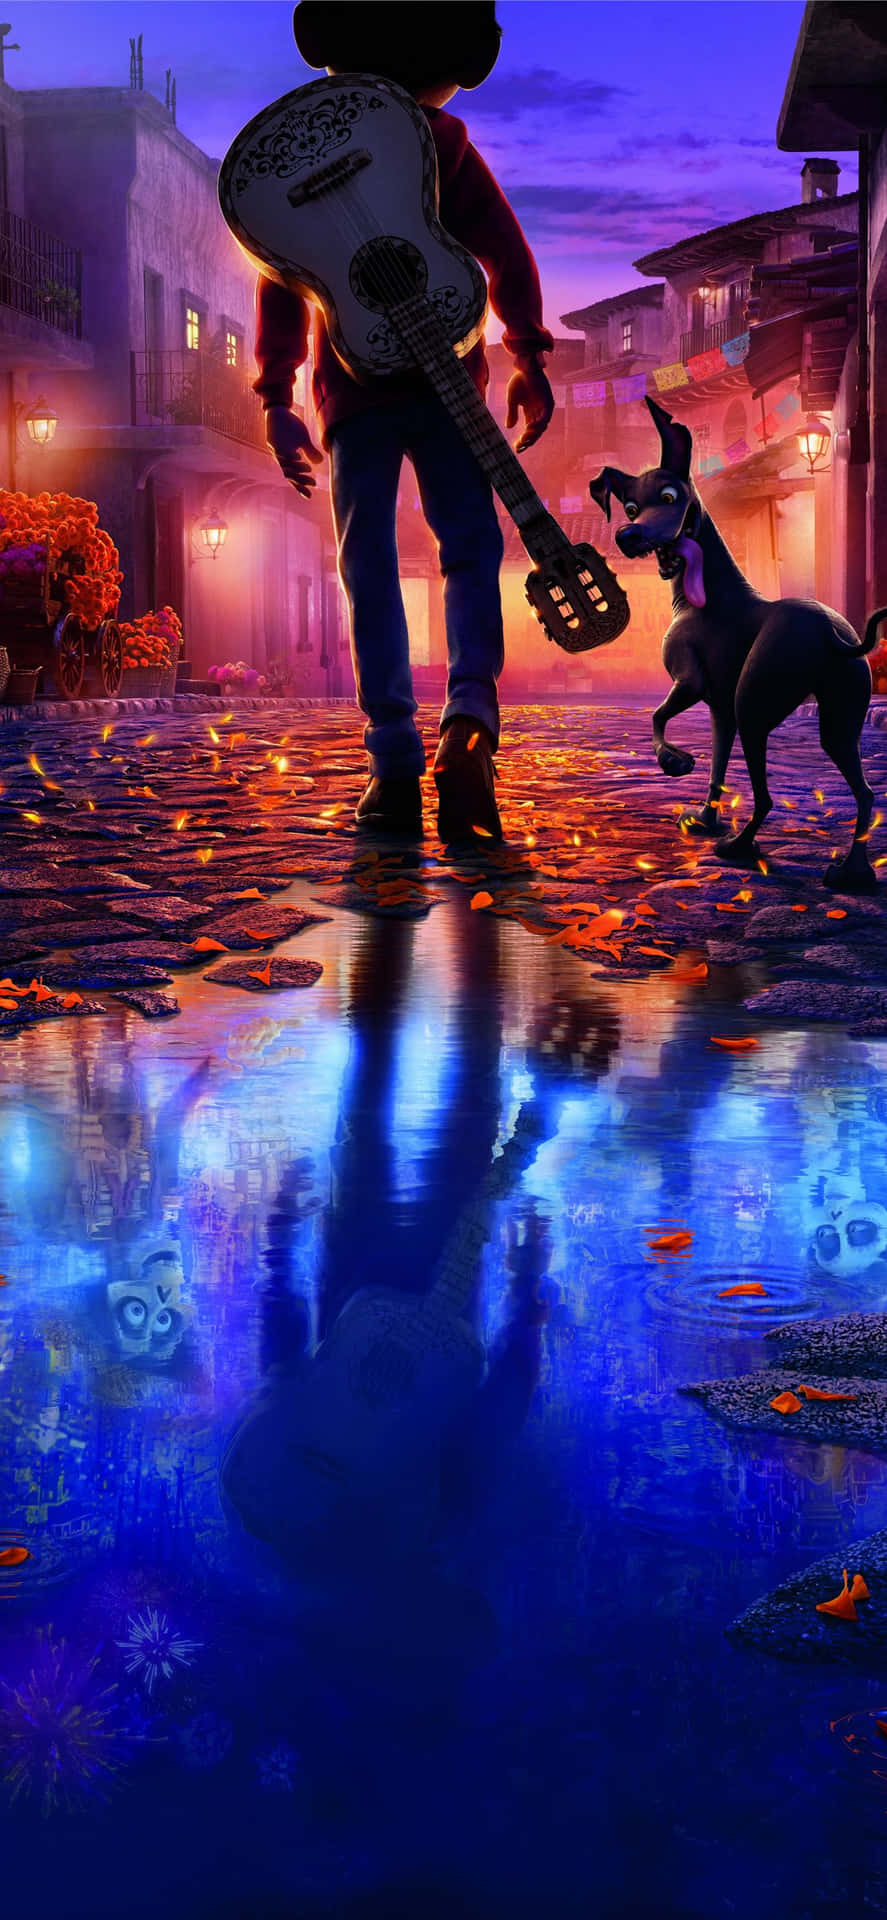 Take a magical journey through the Land of the Dead with Coco